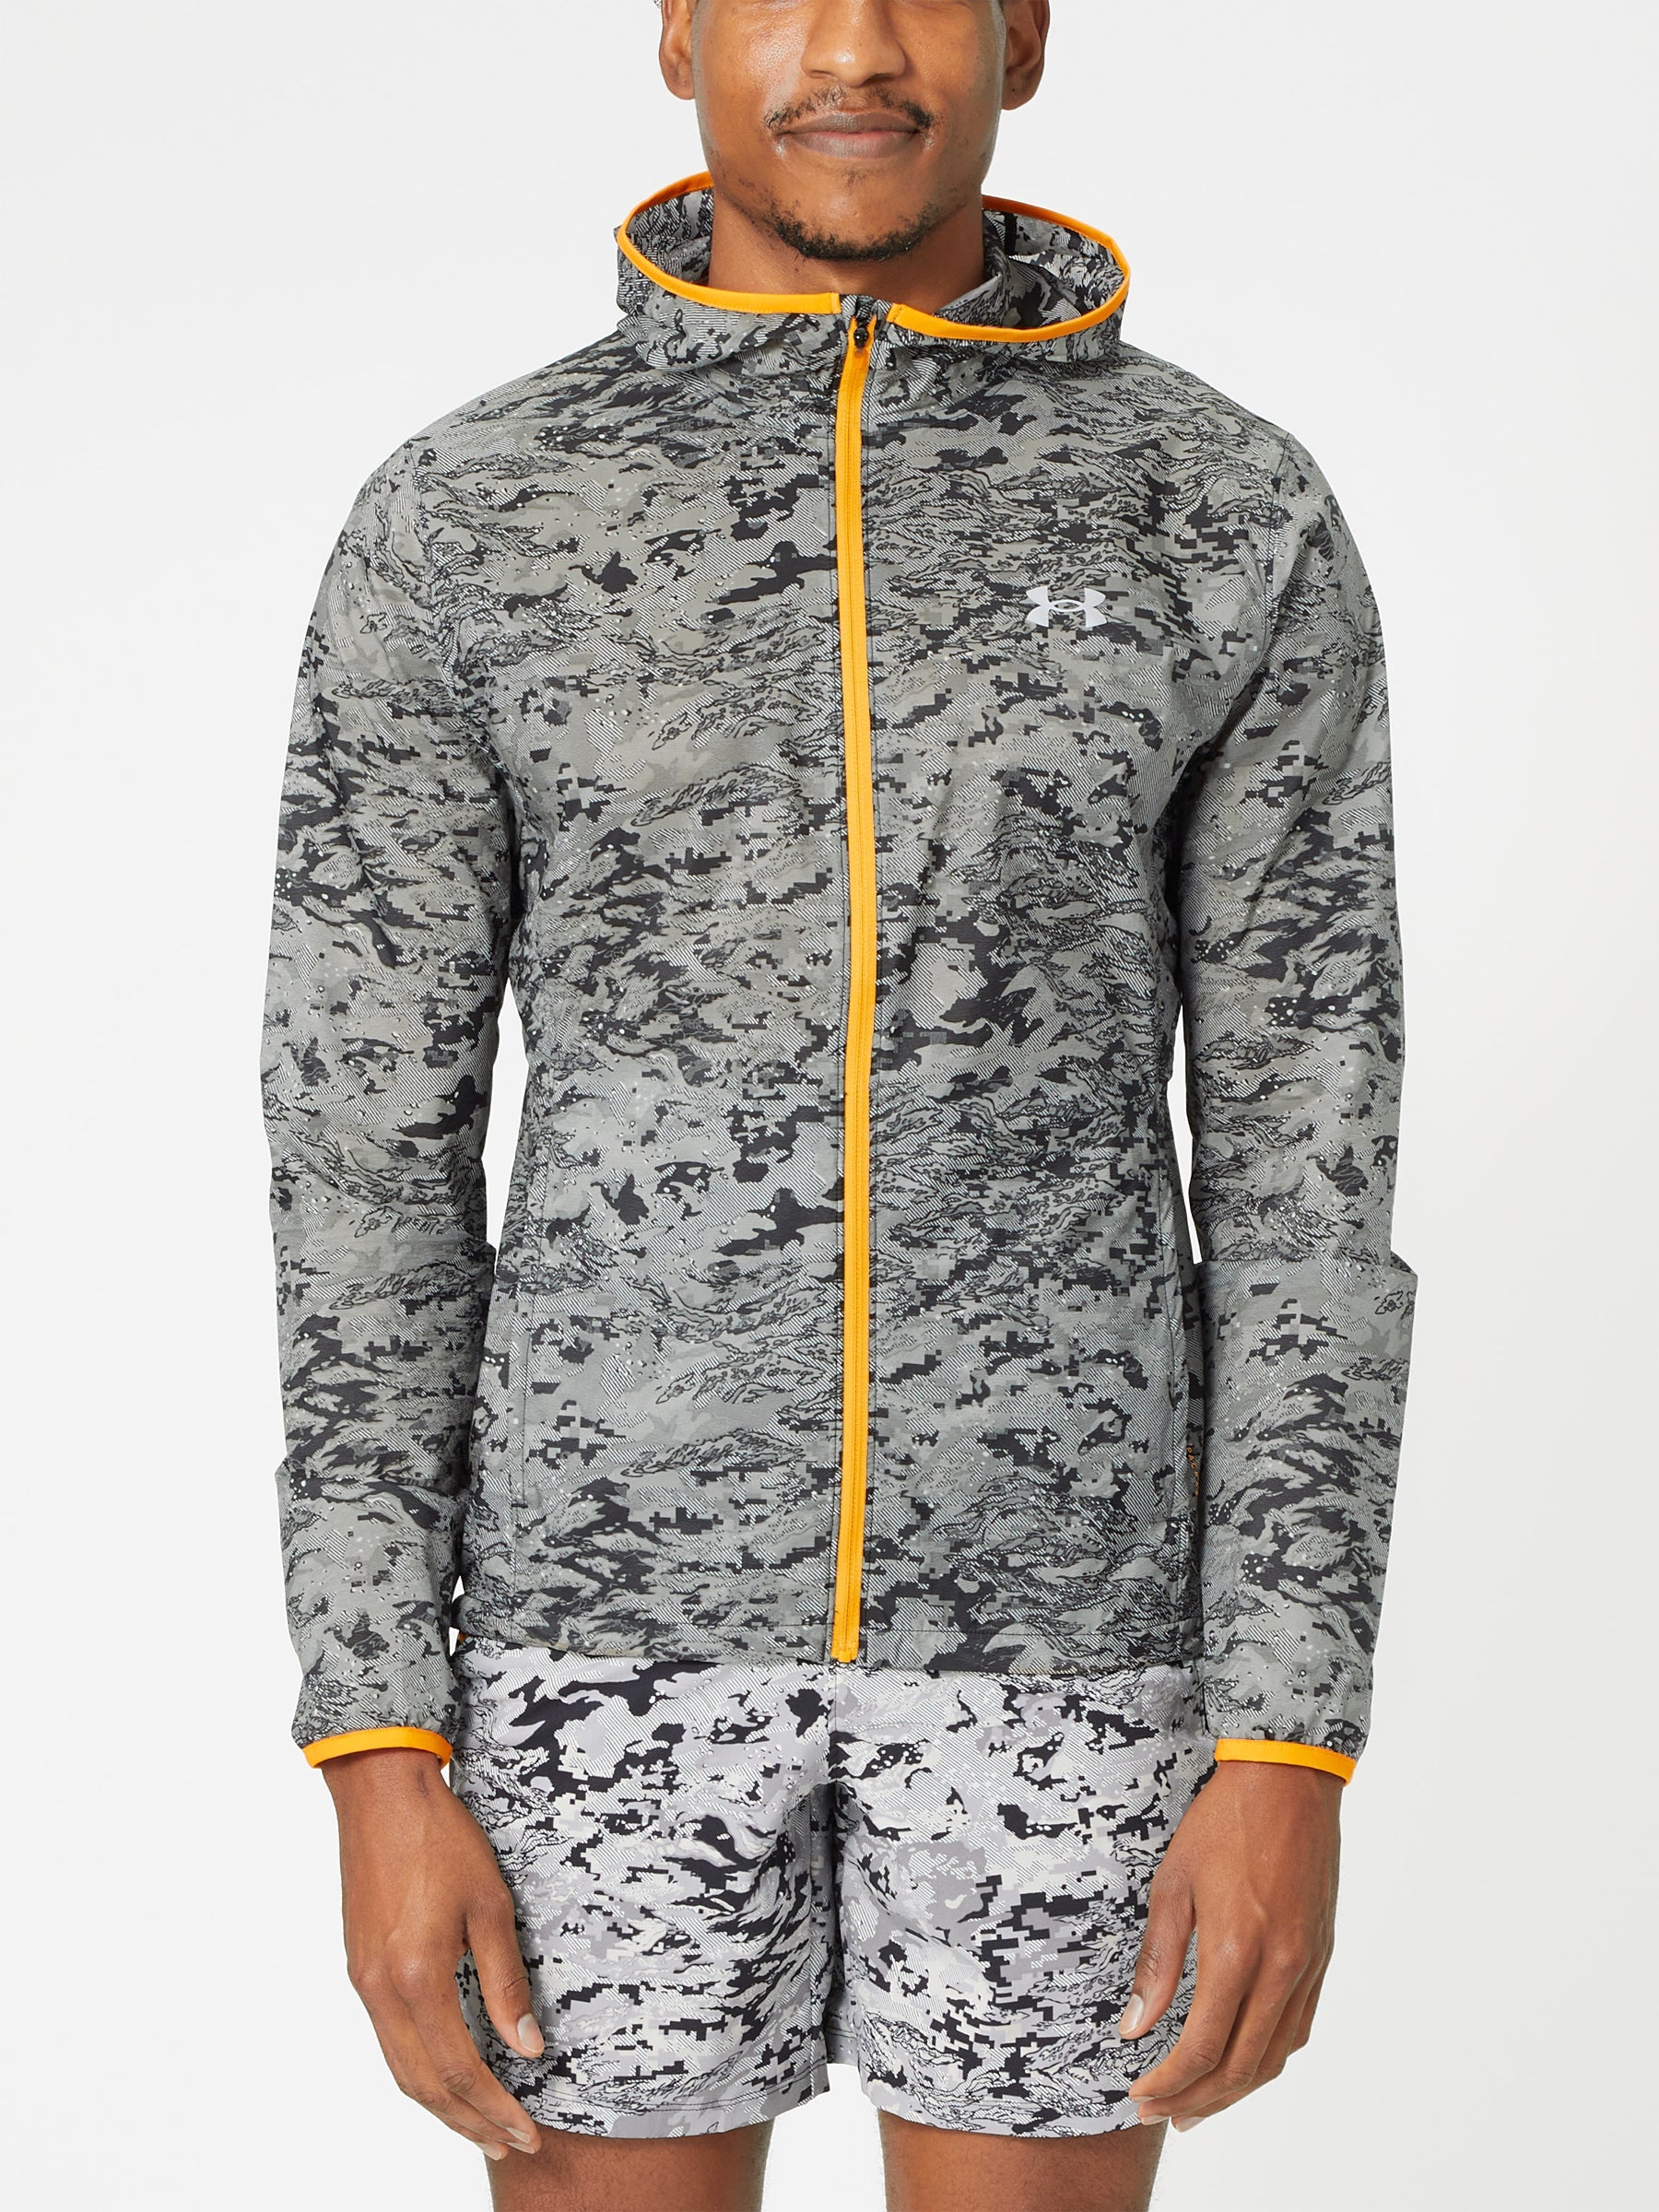 Under Armour Mens Storm Printed Running Training JacketWater Resistant Light 